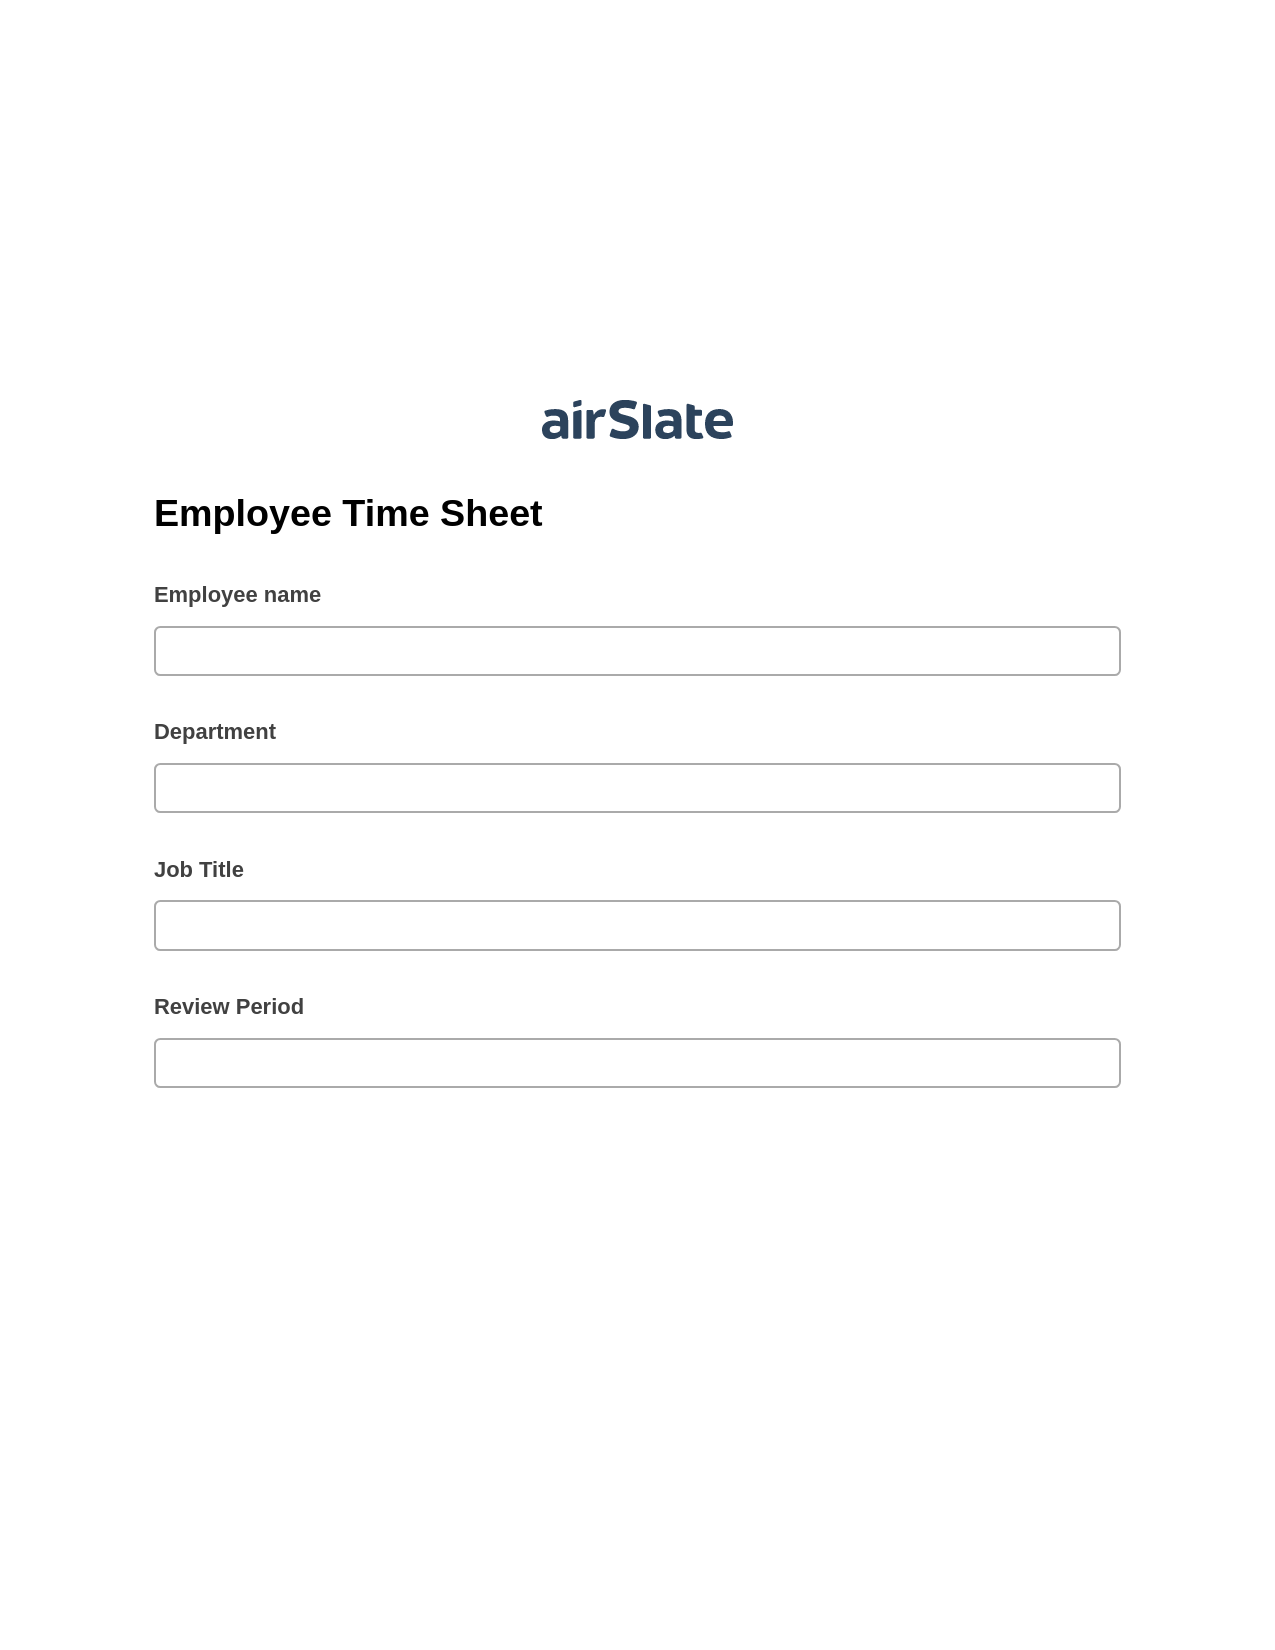 Employee Time Sheet Pre-fill from Salesforce Records Bot, Update NetSuite Record Bot, Webhook Postfinish Bot